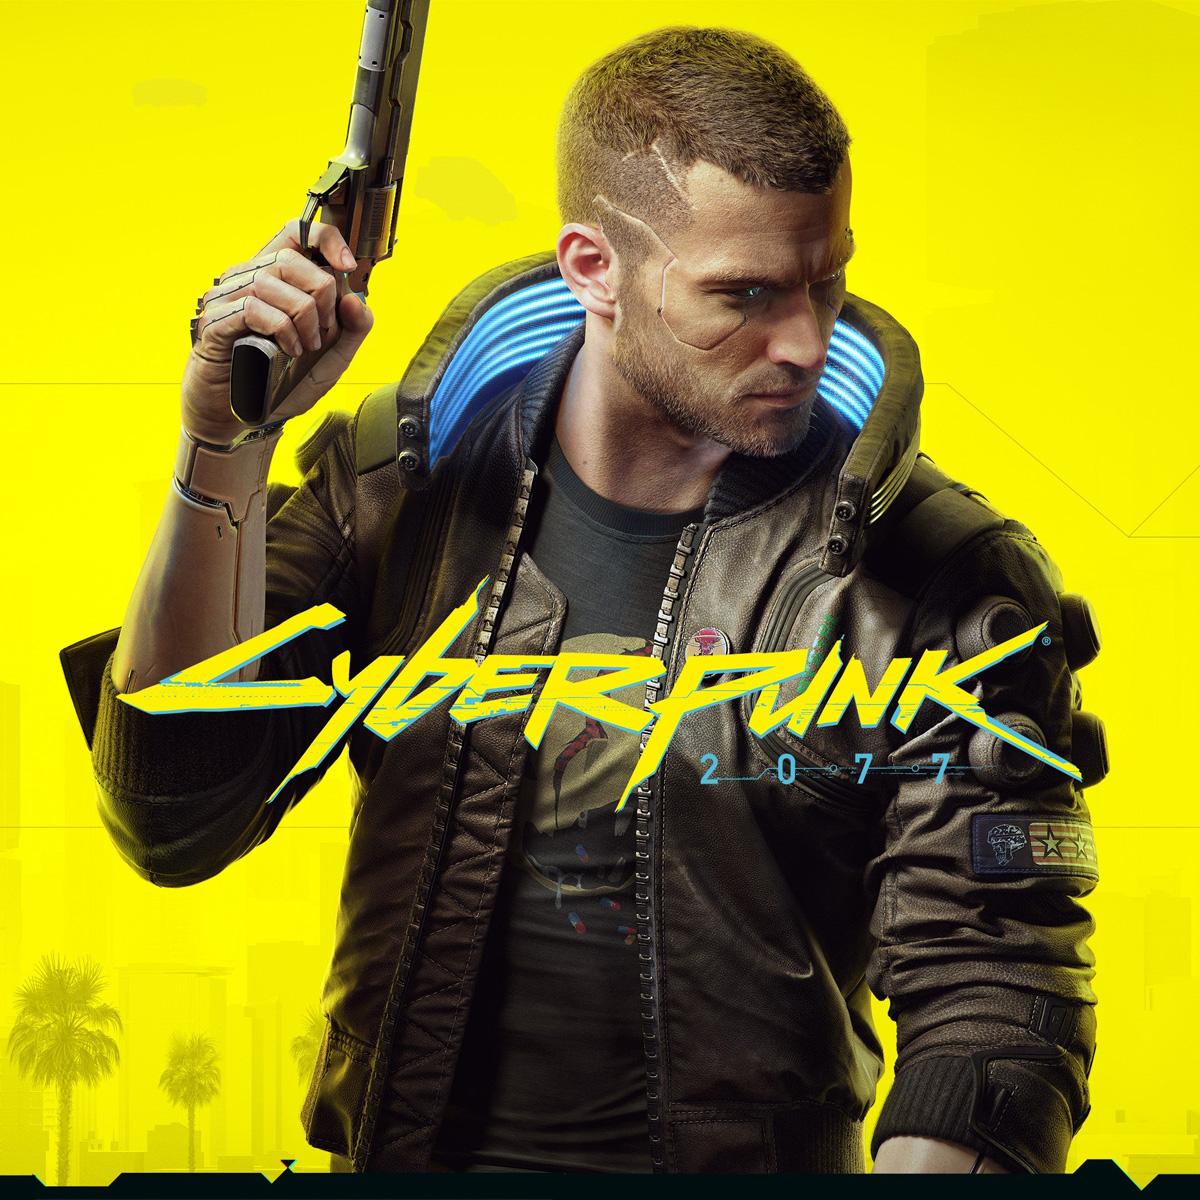 Cyberpunk 2077 PC Game for $16.84